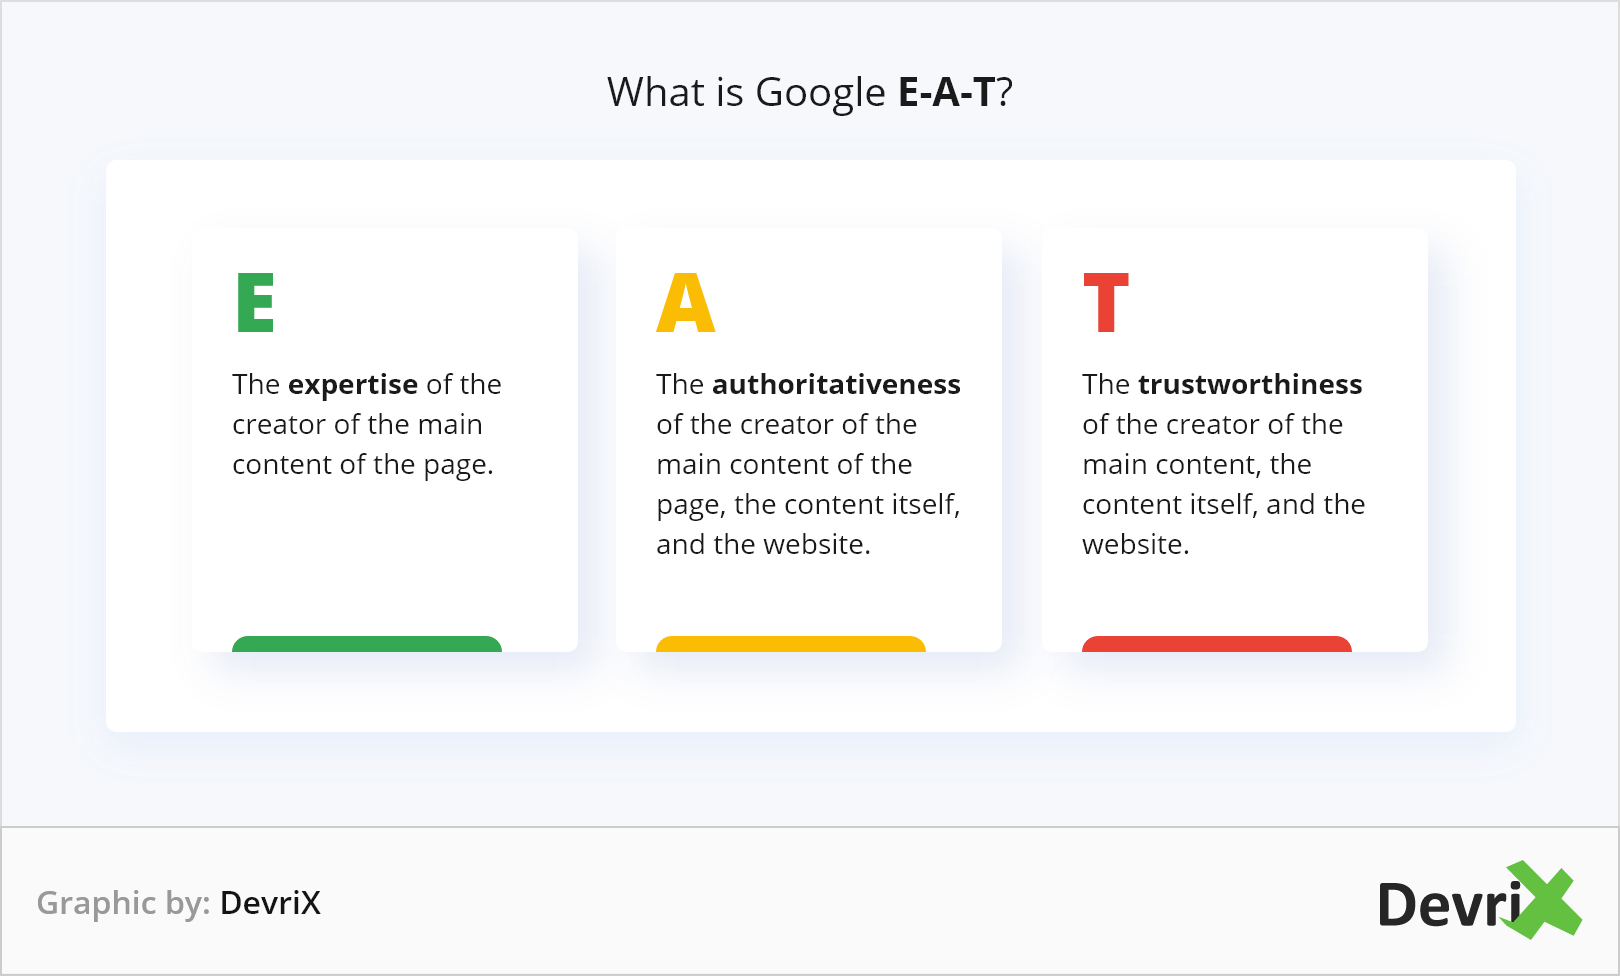 What Is Google E-A-T